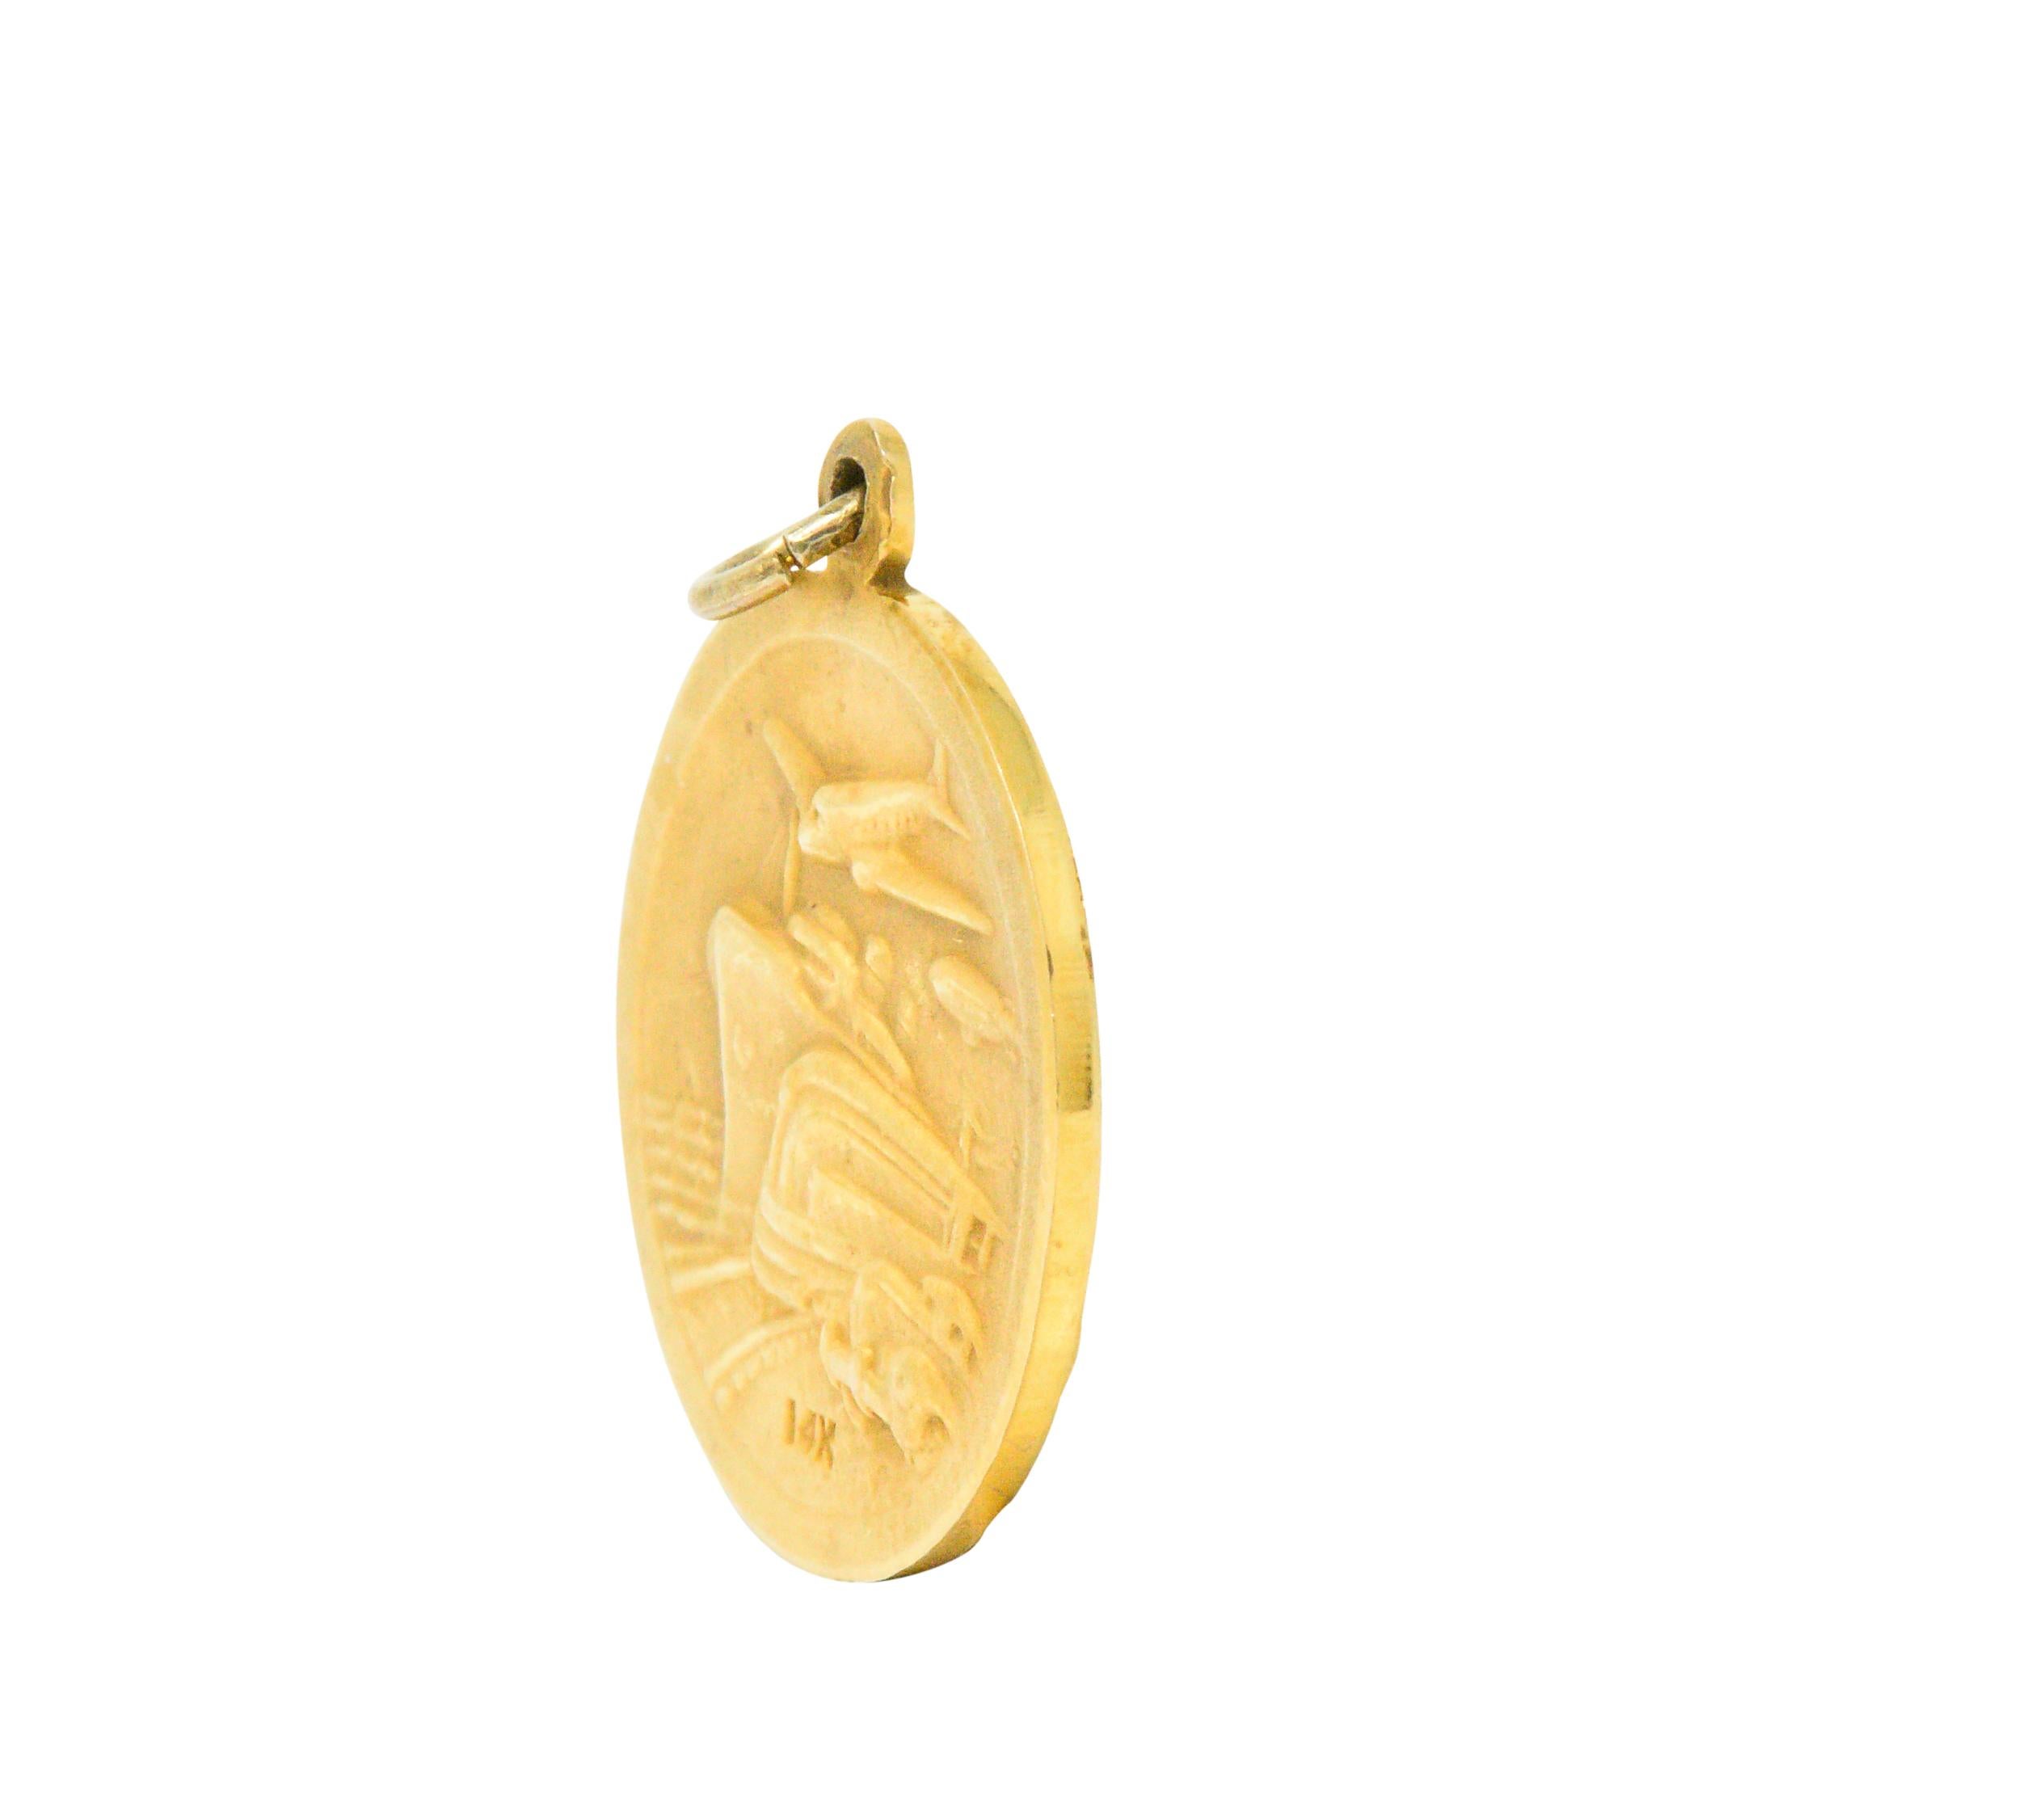 A gold pendant commemorating the 1933 Chicago World's Fair 

One side depicting the newest innovations of the time, new cars, trains, planes and ships

The other side depicts an old man on his knees with a staff and a baby with a globus cruciger